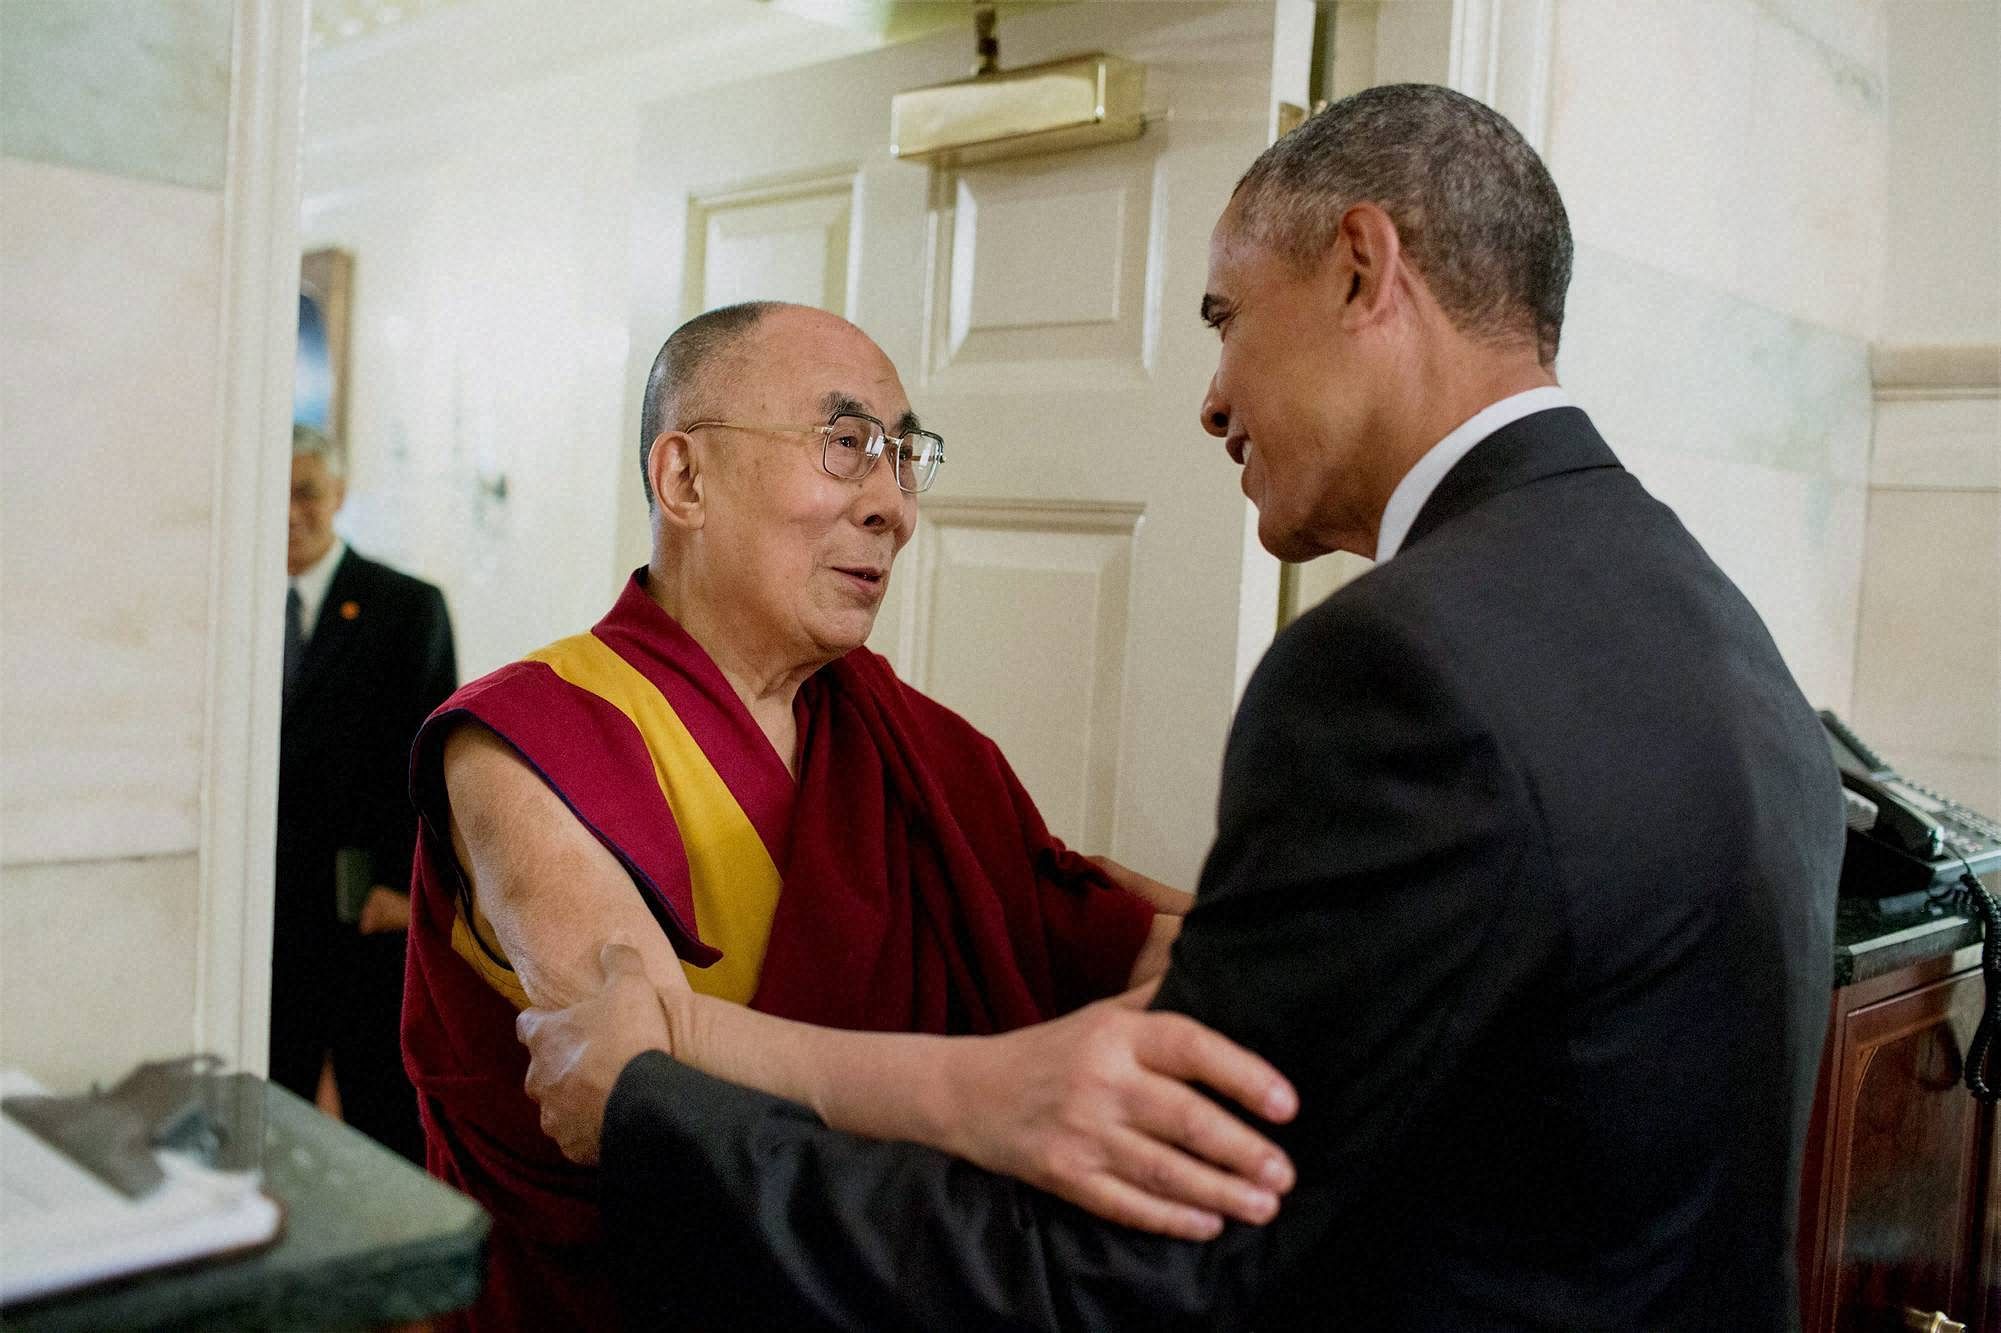 US President Barack Obama greets Tibetan spiritual leader Dalai Lama at the entrance of the Map Room of the White House in Washington on Wednesday. PTI Photo